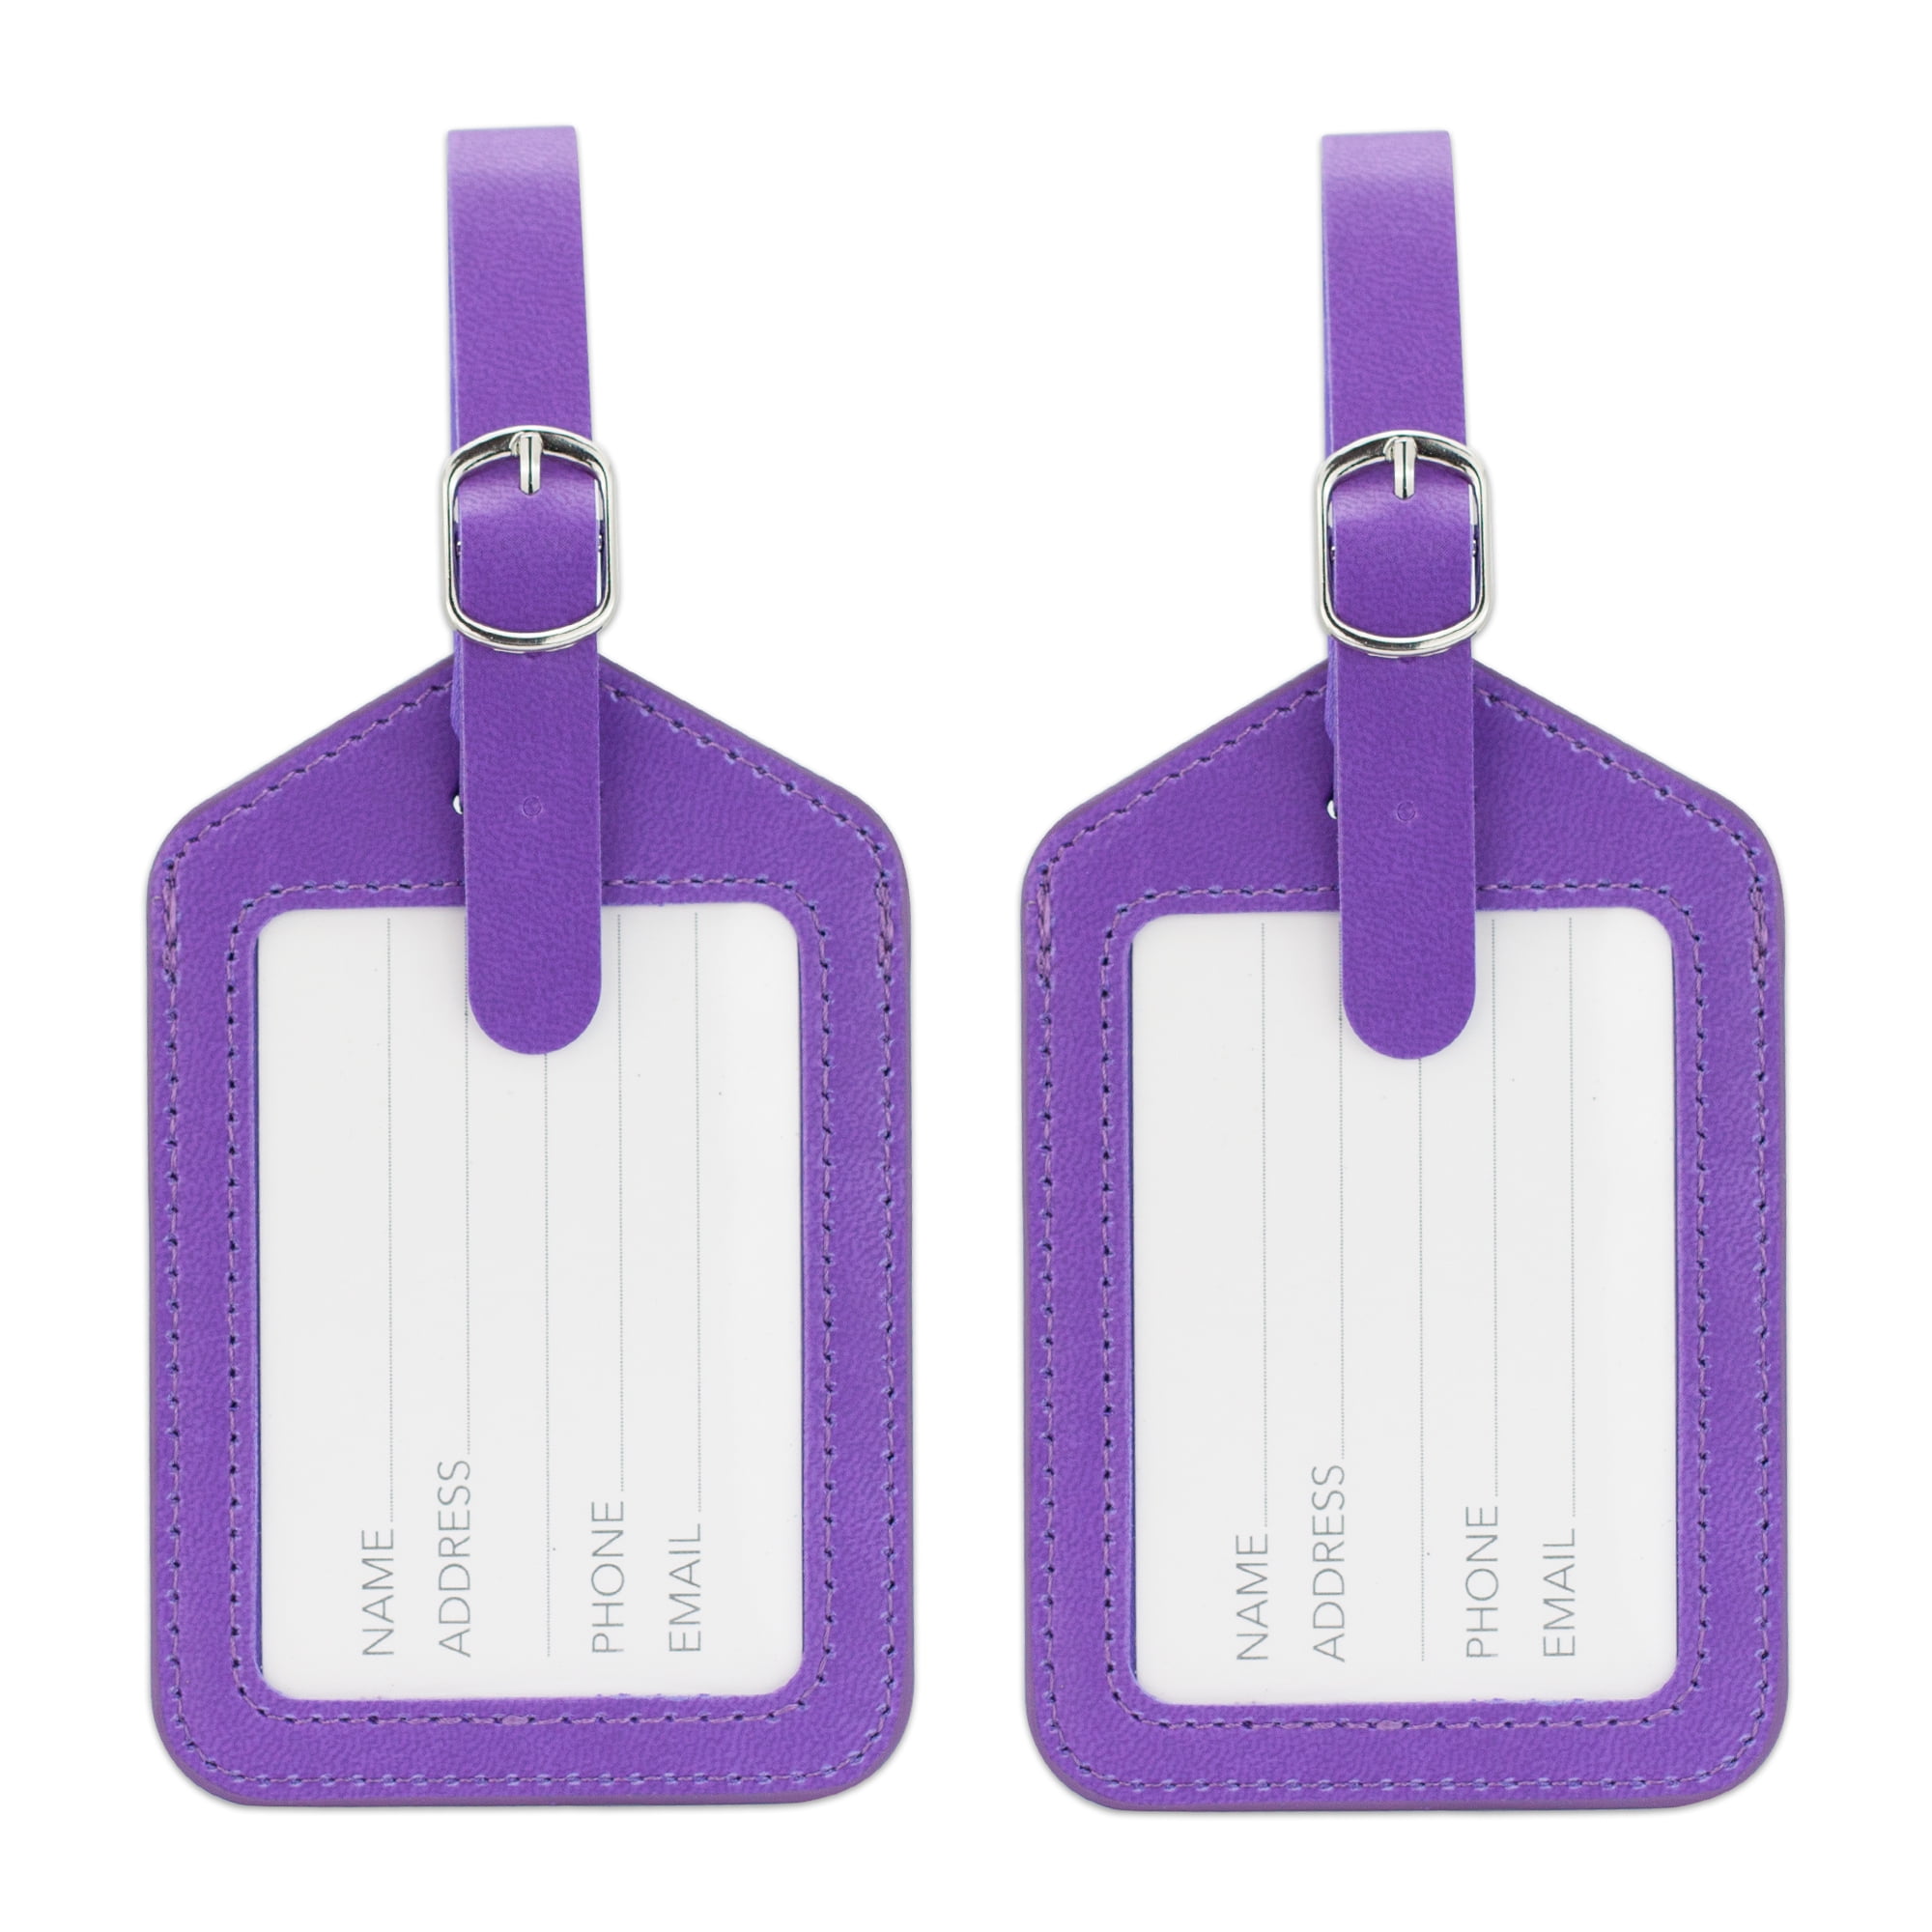 2 Pack Luggage Tags Drum Set Handbag Tag For Travel Bag Suitcase Accessories